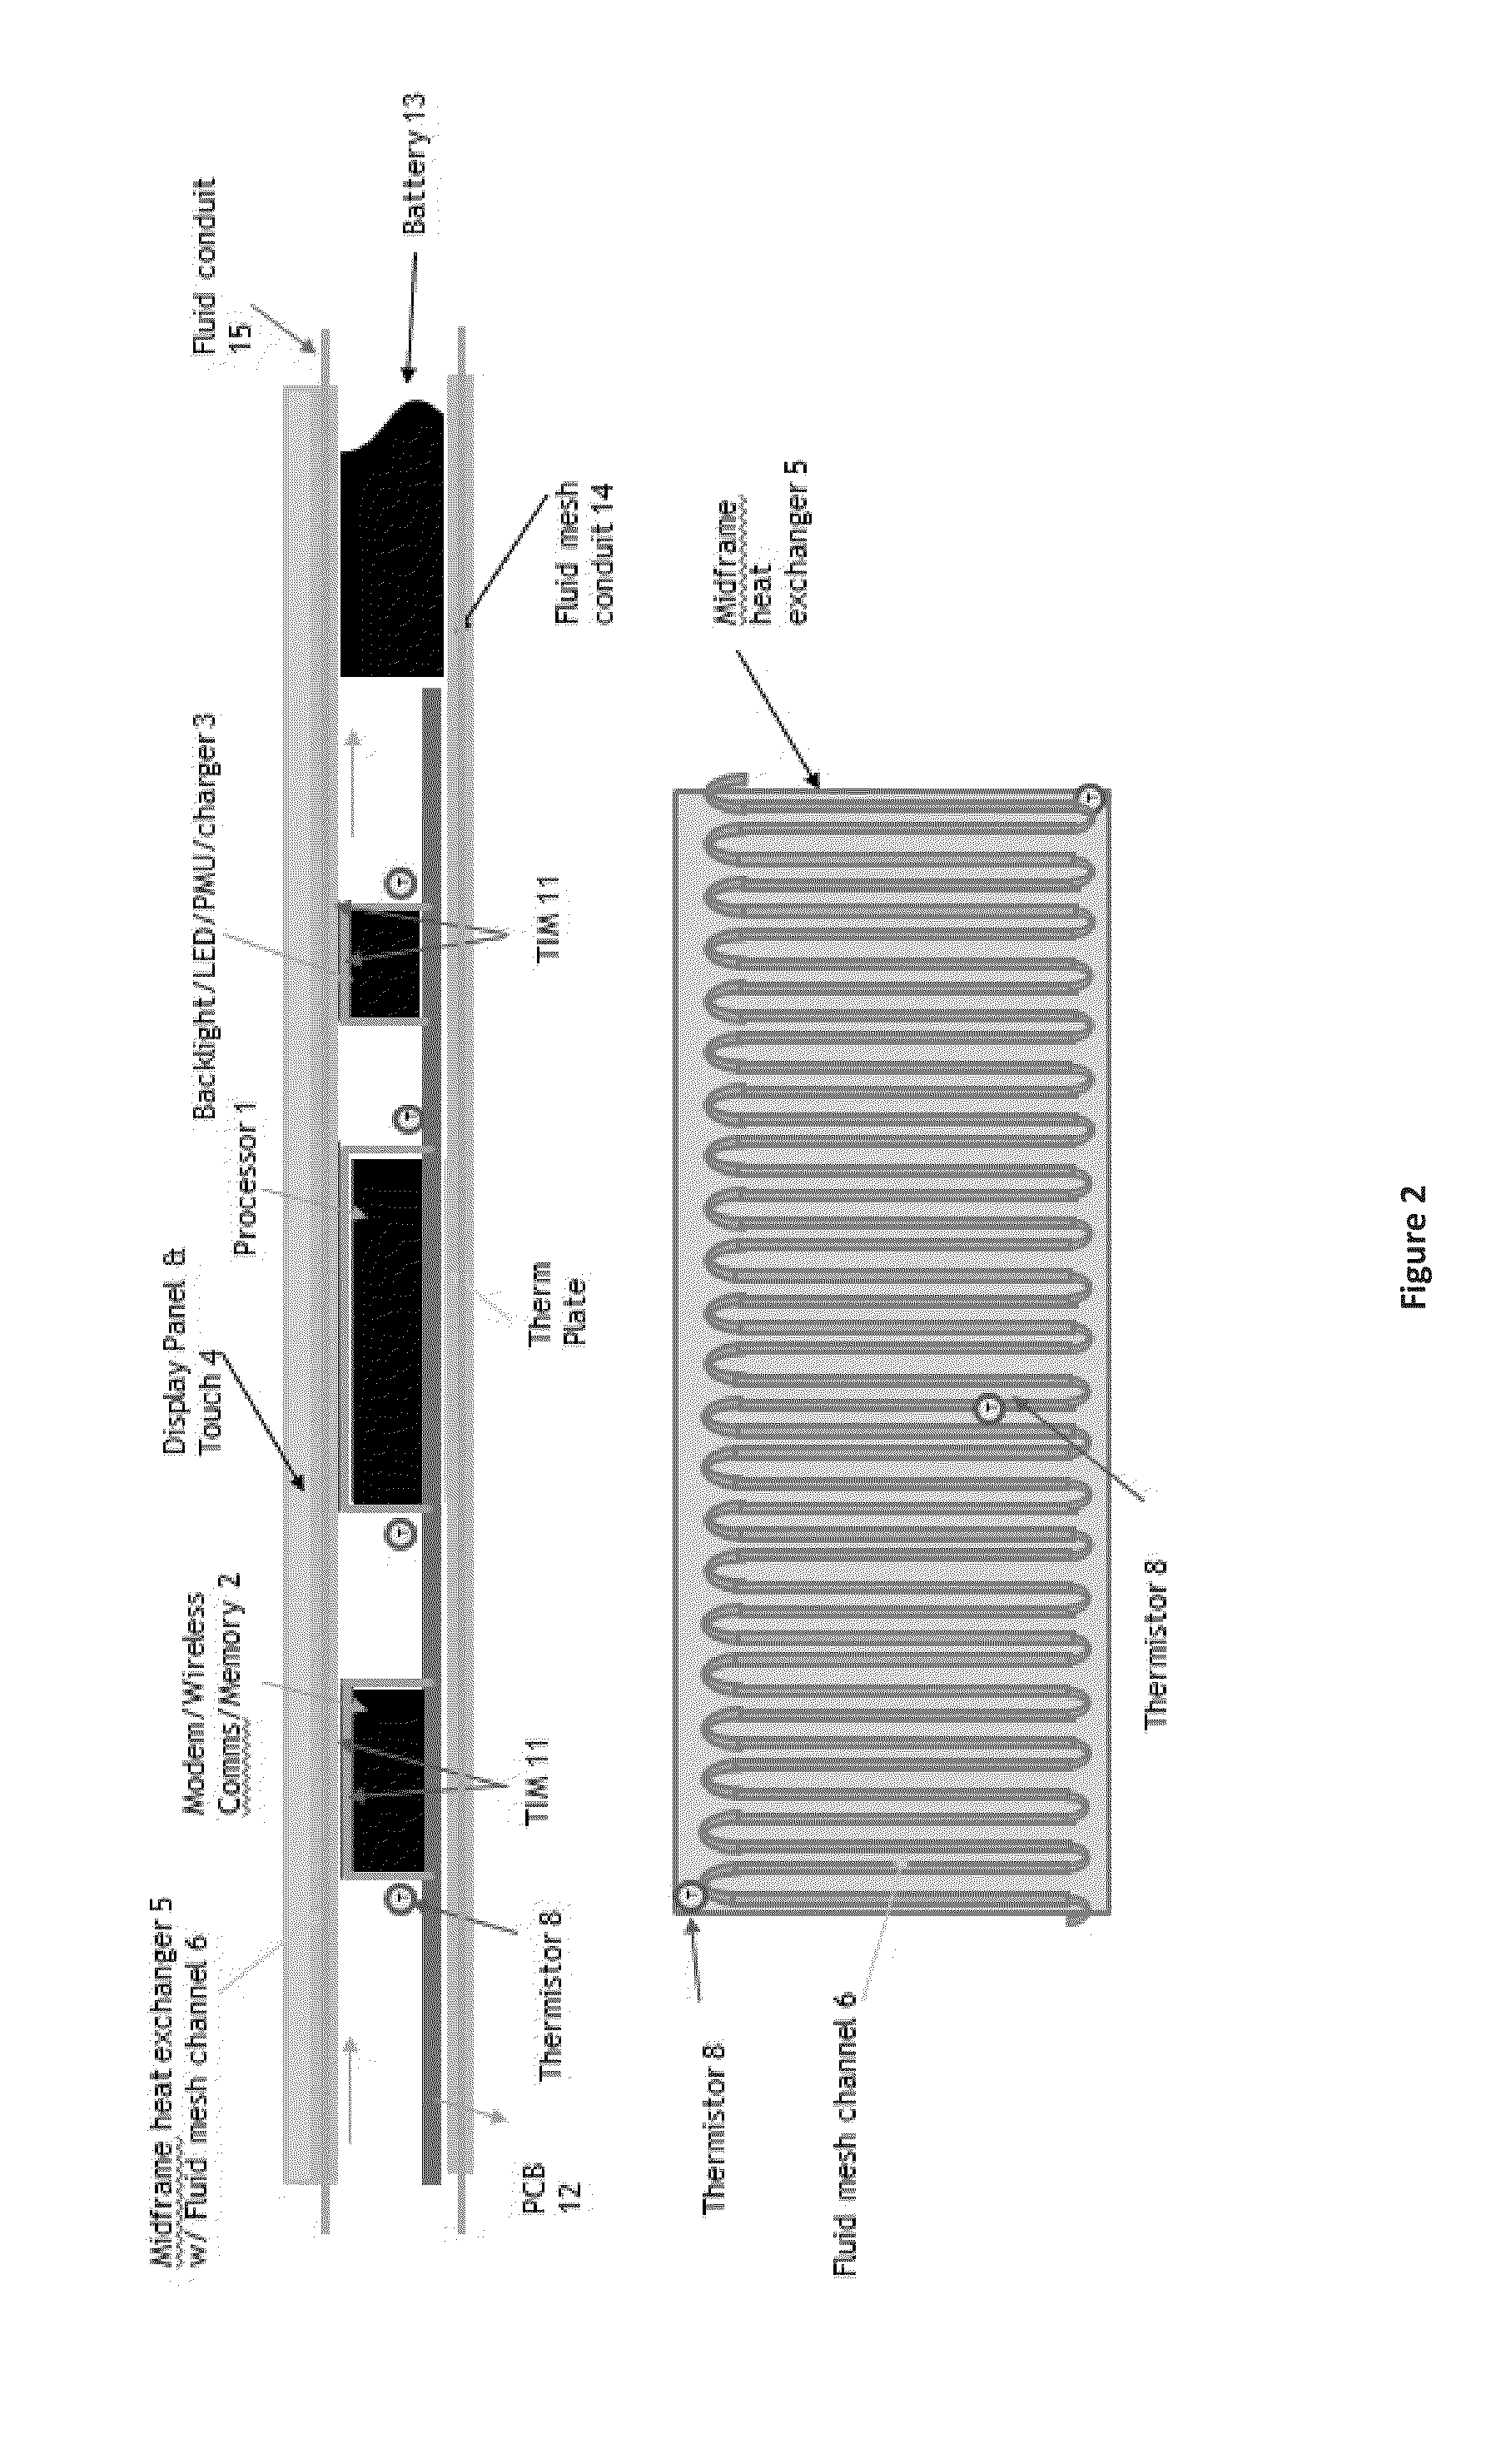 Method and apparatus for dynamically cooling electronic devices